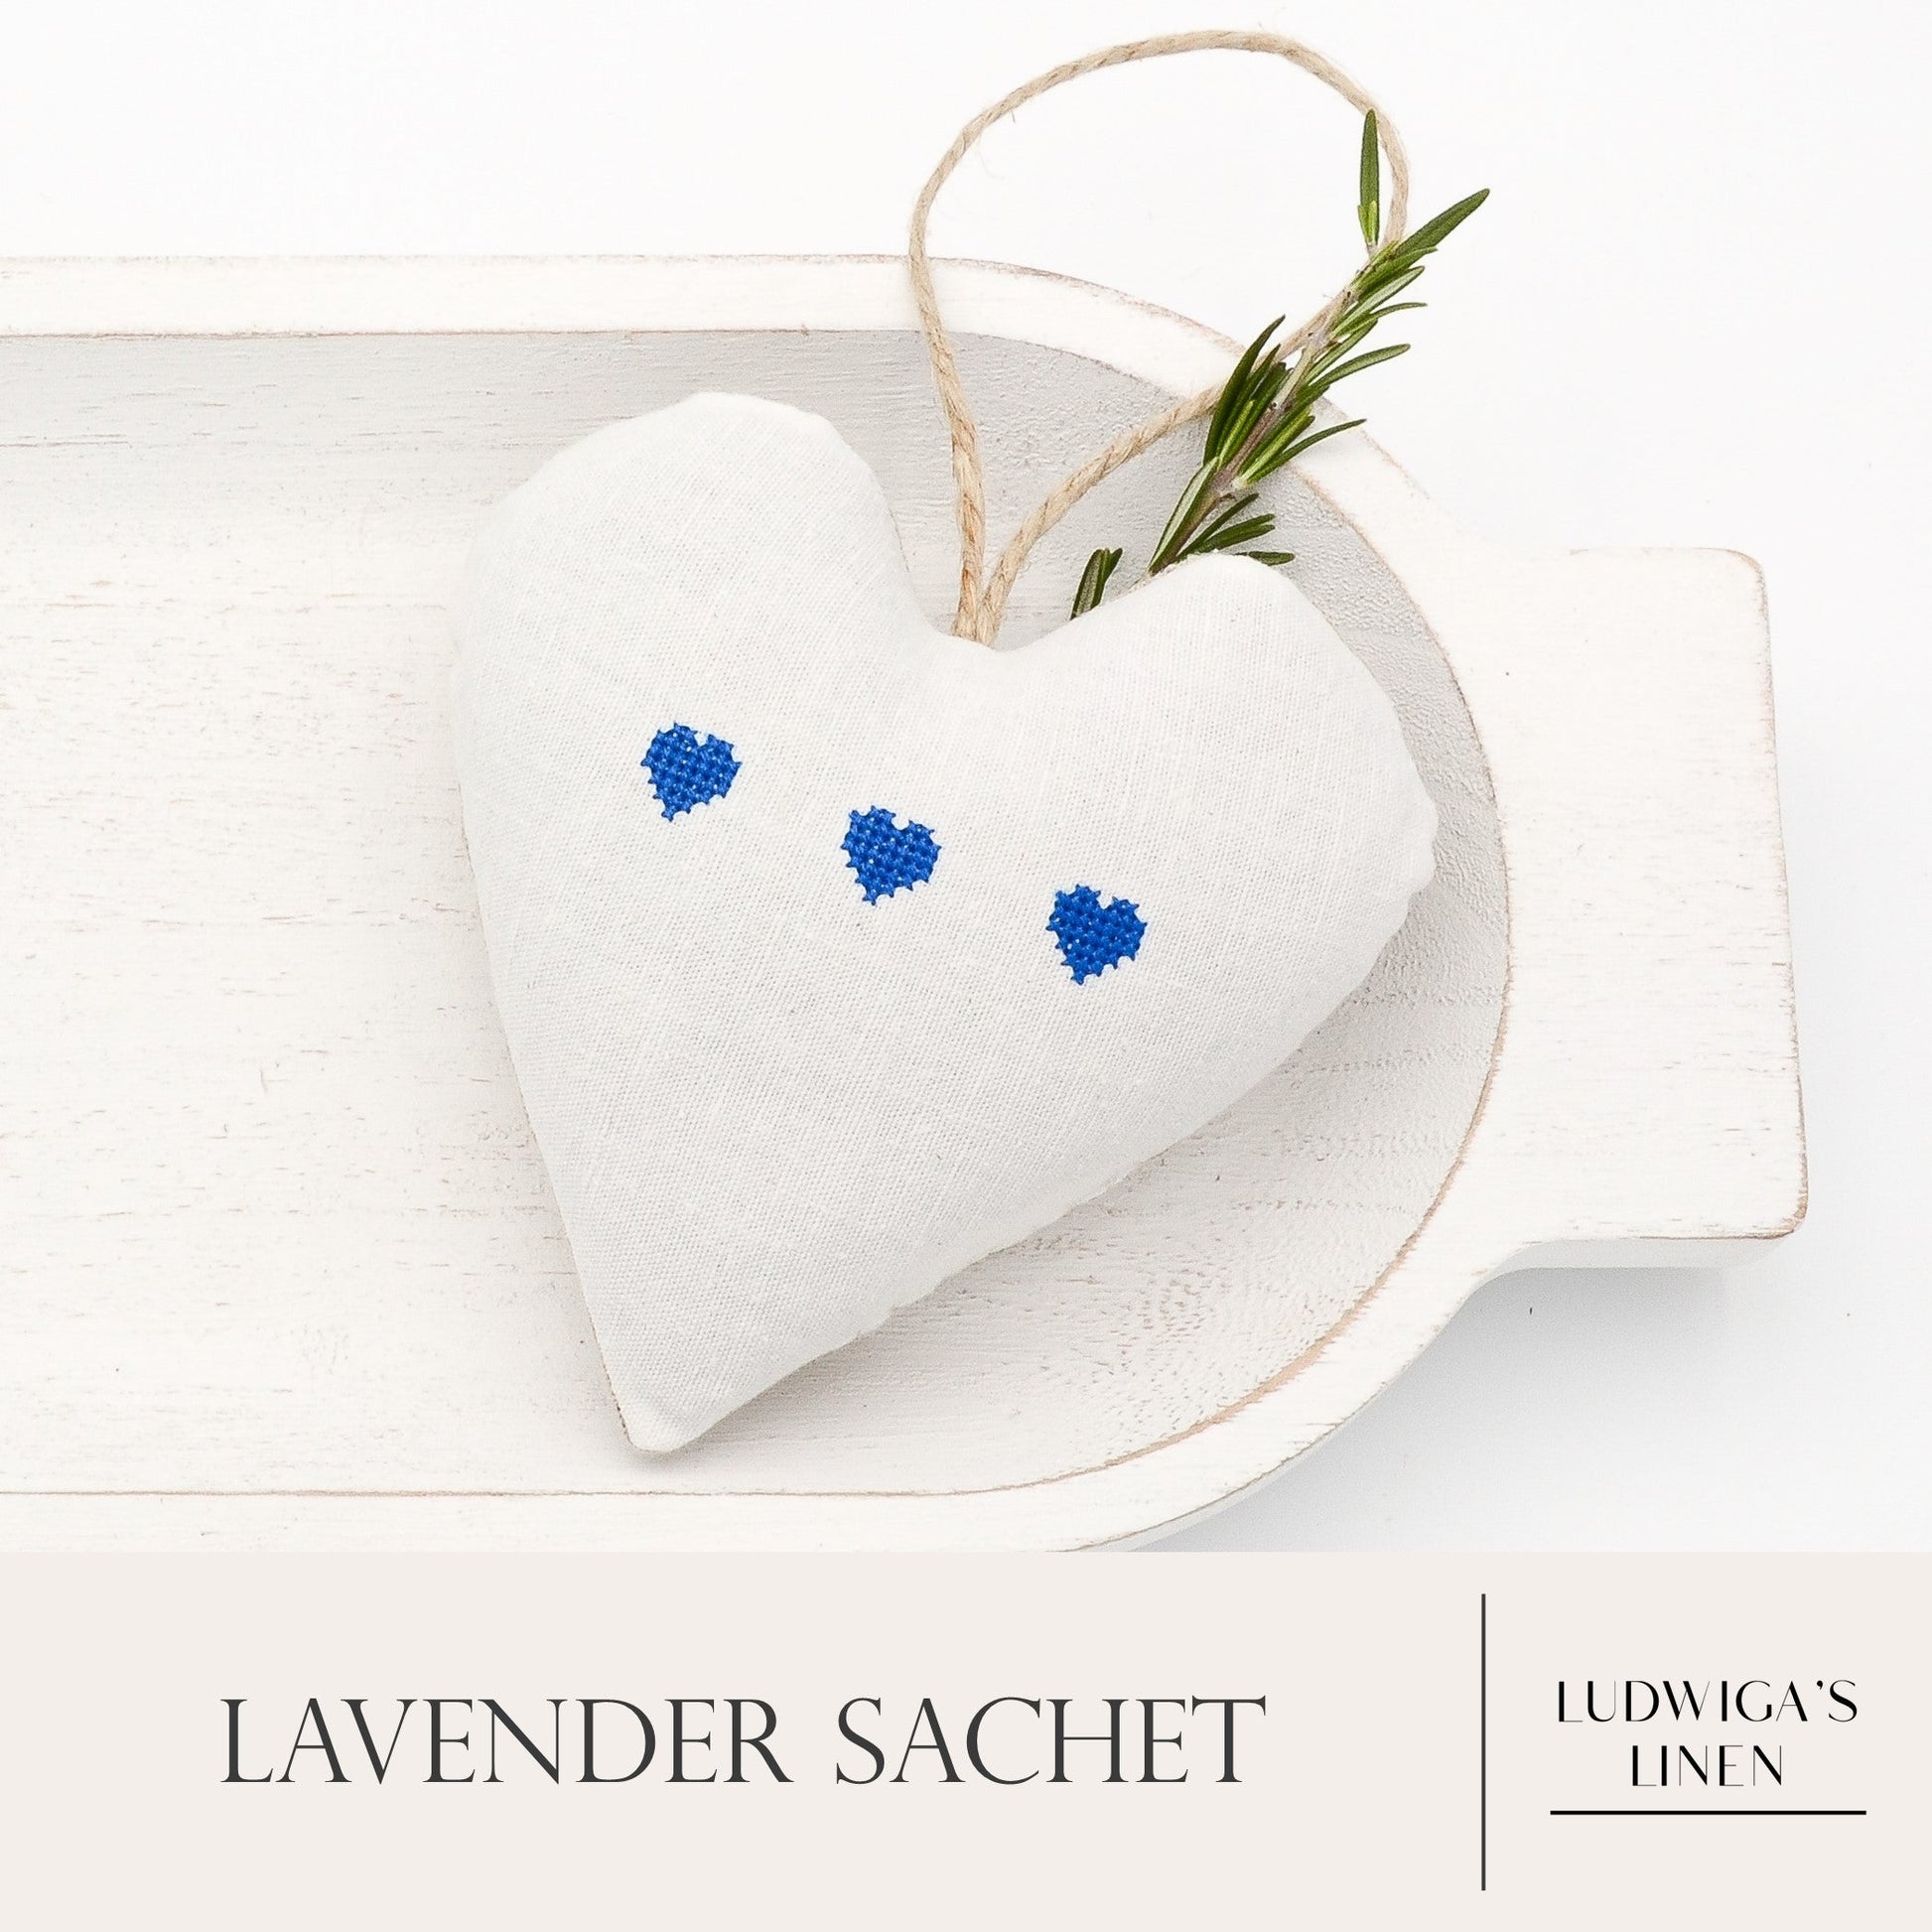 Antique/vintage European white linen lavender sachet heart with three blue embroidered hearts, hemp twine tie and filled with high quality lavender from Provence France